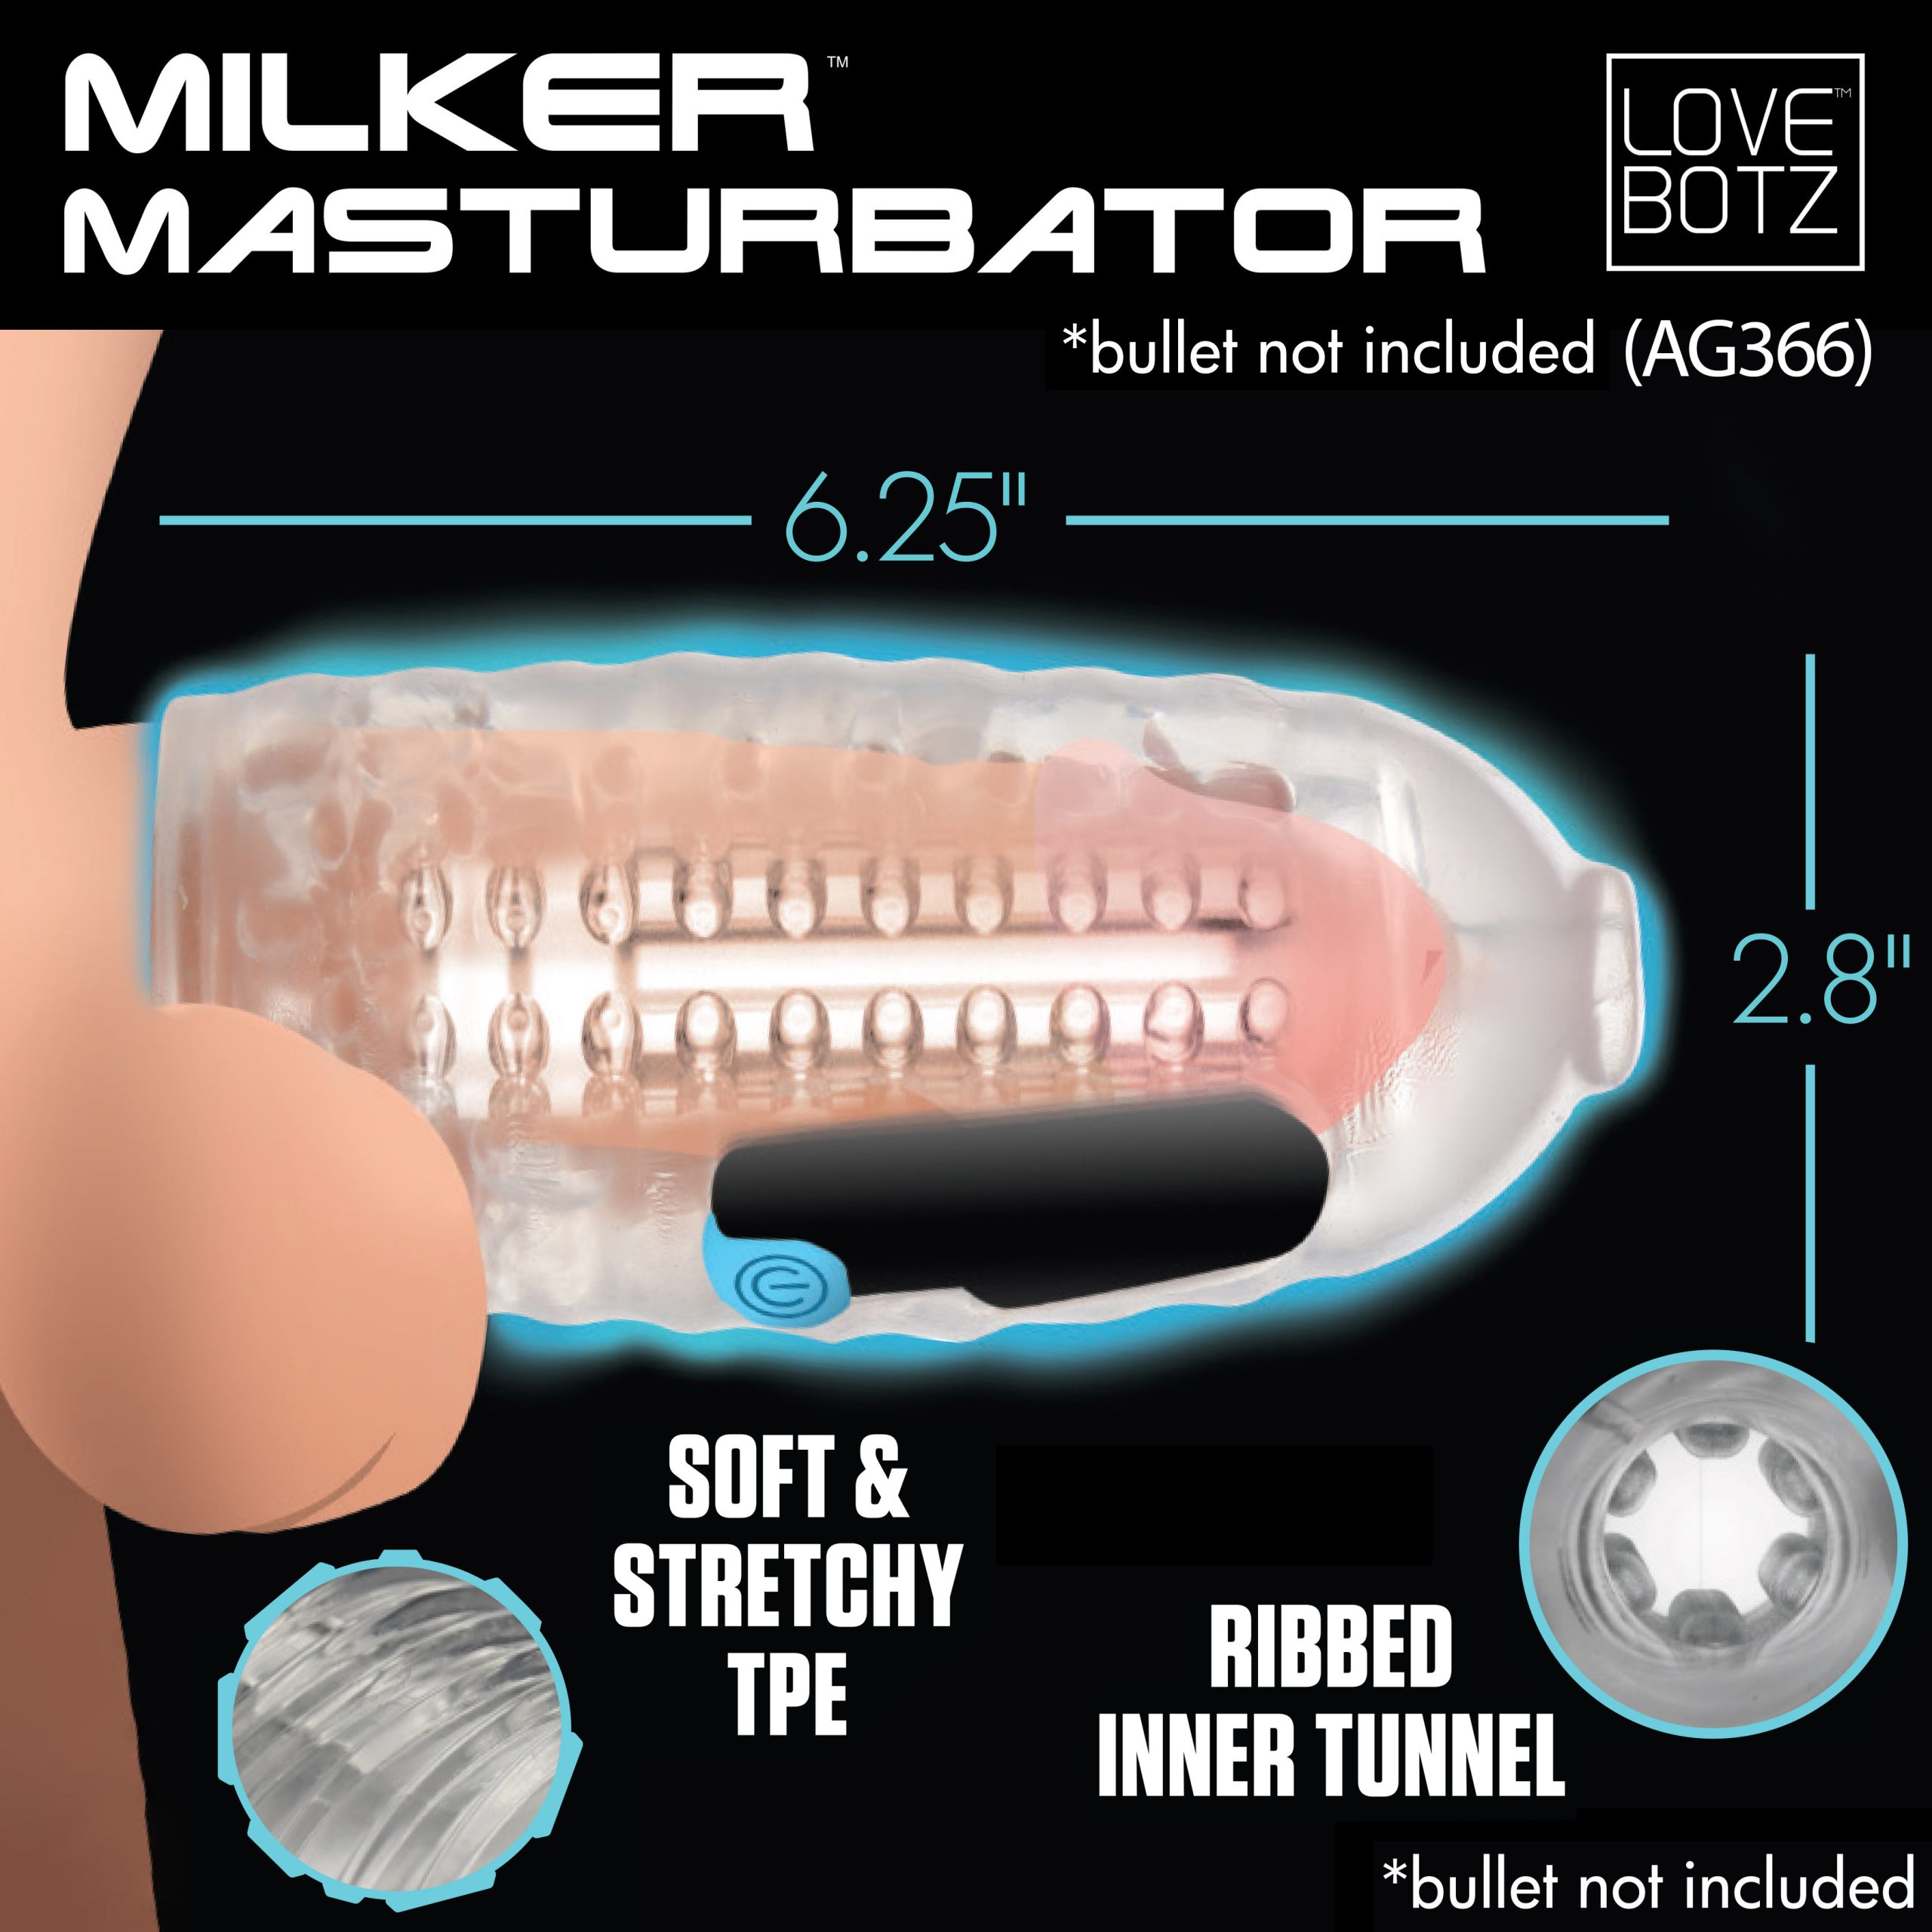 Take your jerk off sessions to the next level with this Milker TPE Masturbator! The thick stroker is soft and stretchy so it can fit snug over any shaft. Enjoy the ribbed